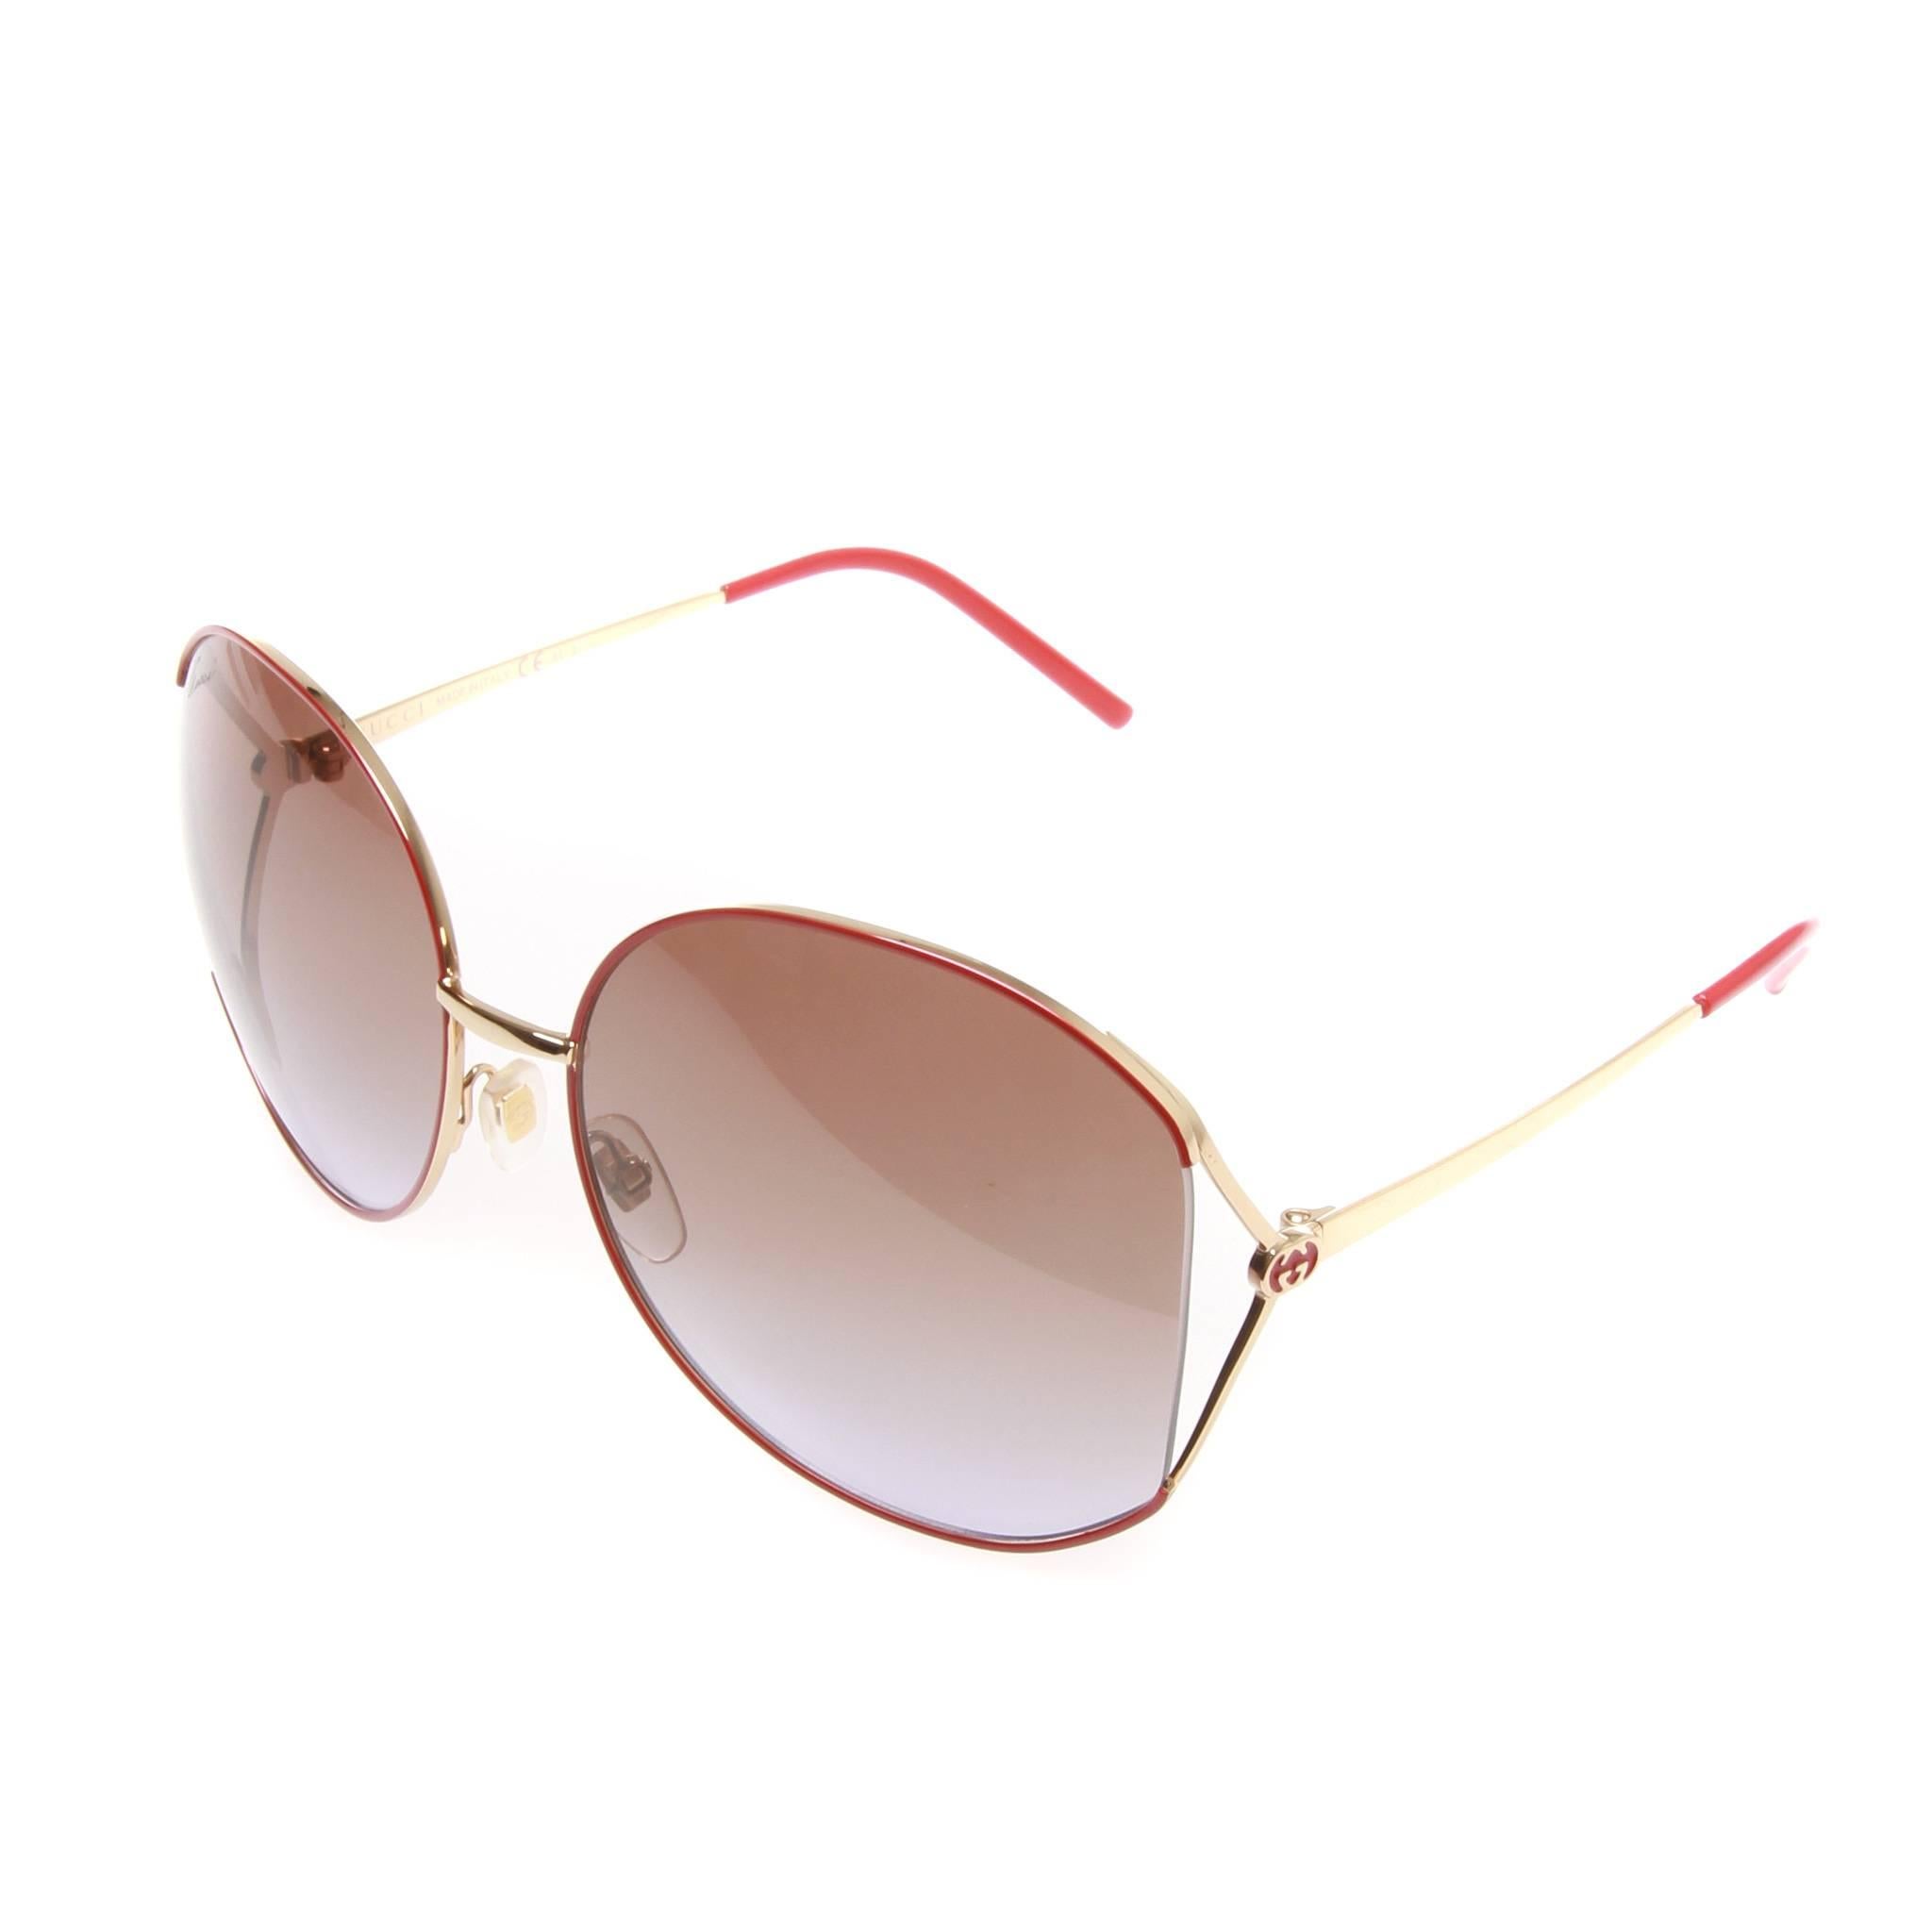 Fine gold-tone framed Gucci oversized glasses in the GG4208/S style. Red accents and grey gradient lenses. Features the interlocked GG logo at either temple. 

Excellent condition. Comes with authentic case.